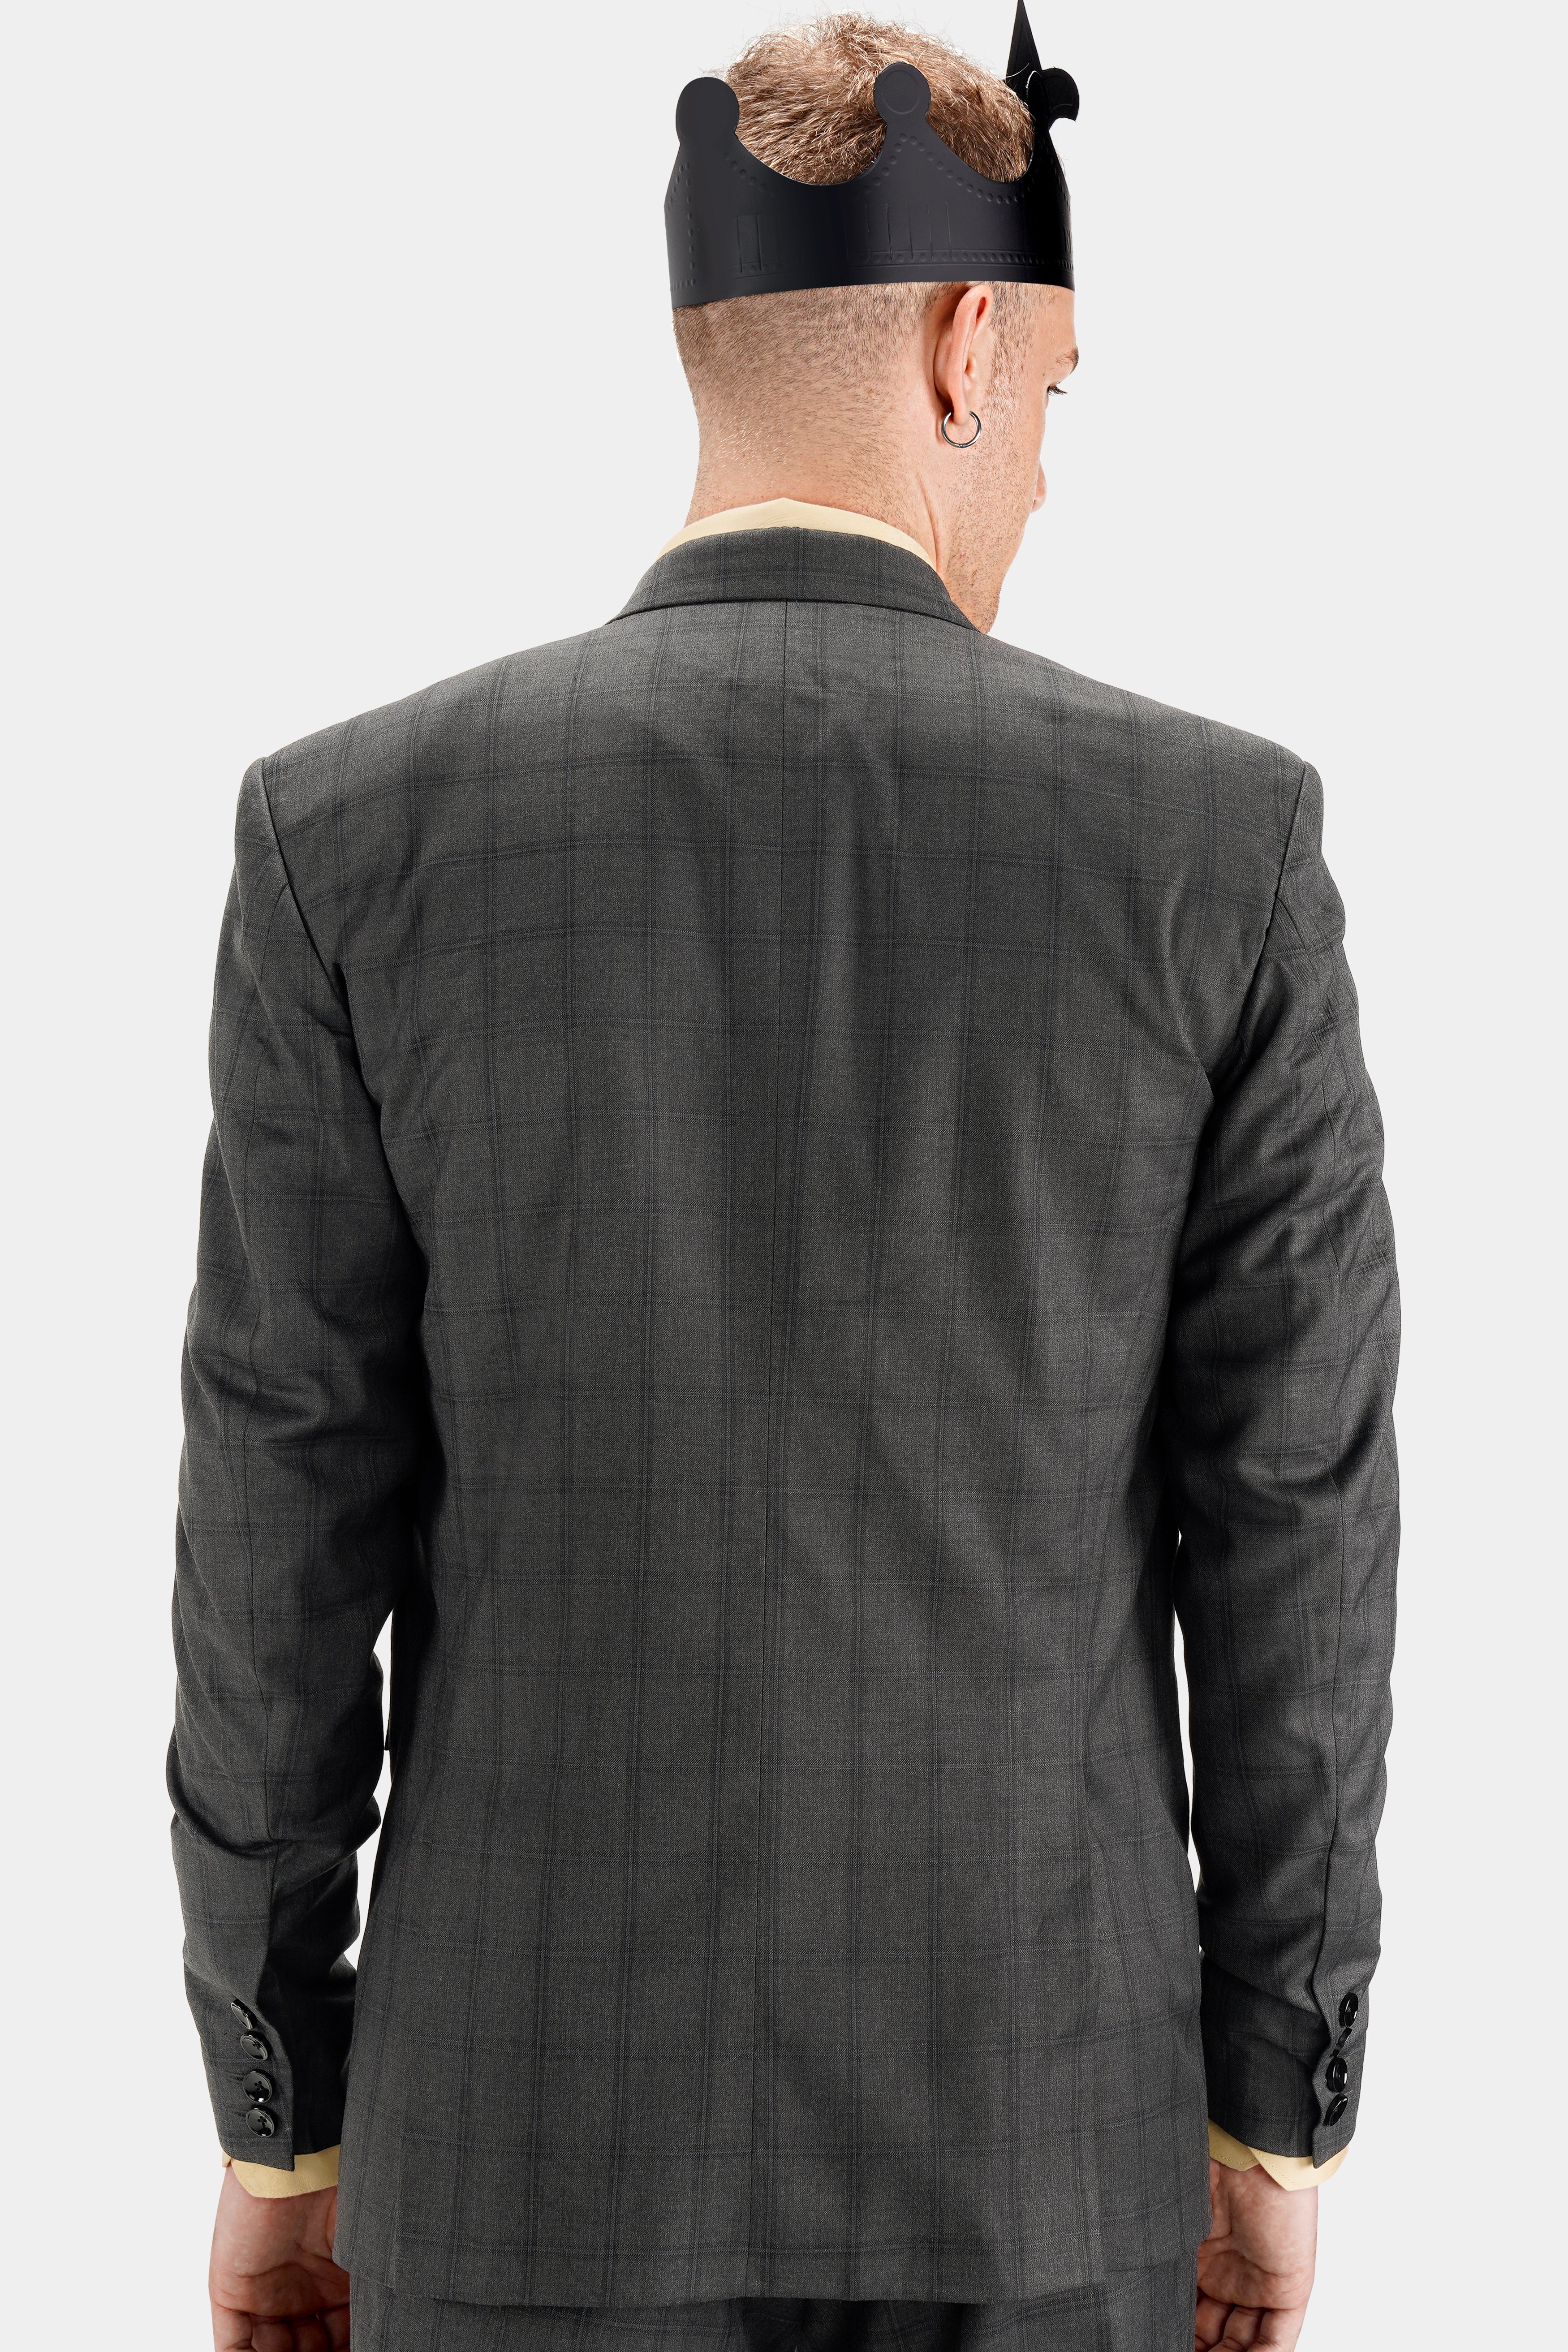 Chicago Gray Checkered Wool Rich Single Breasted Blazer BL2741-SB-36, BL2741-SB-38, BL2741-SB-40, BL2741-SB-42, BL2741-SB-44, BL2741-SB-46, BL2741-SB-48, BL2741-SB-50, BL2741-SB-52, BL2741-SB-54, BL2741-SB-56, BL2741-SB-58, BL2741-SB-60